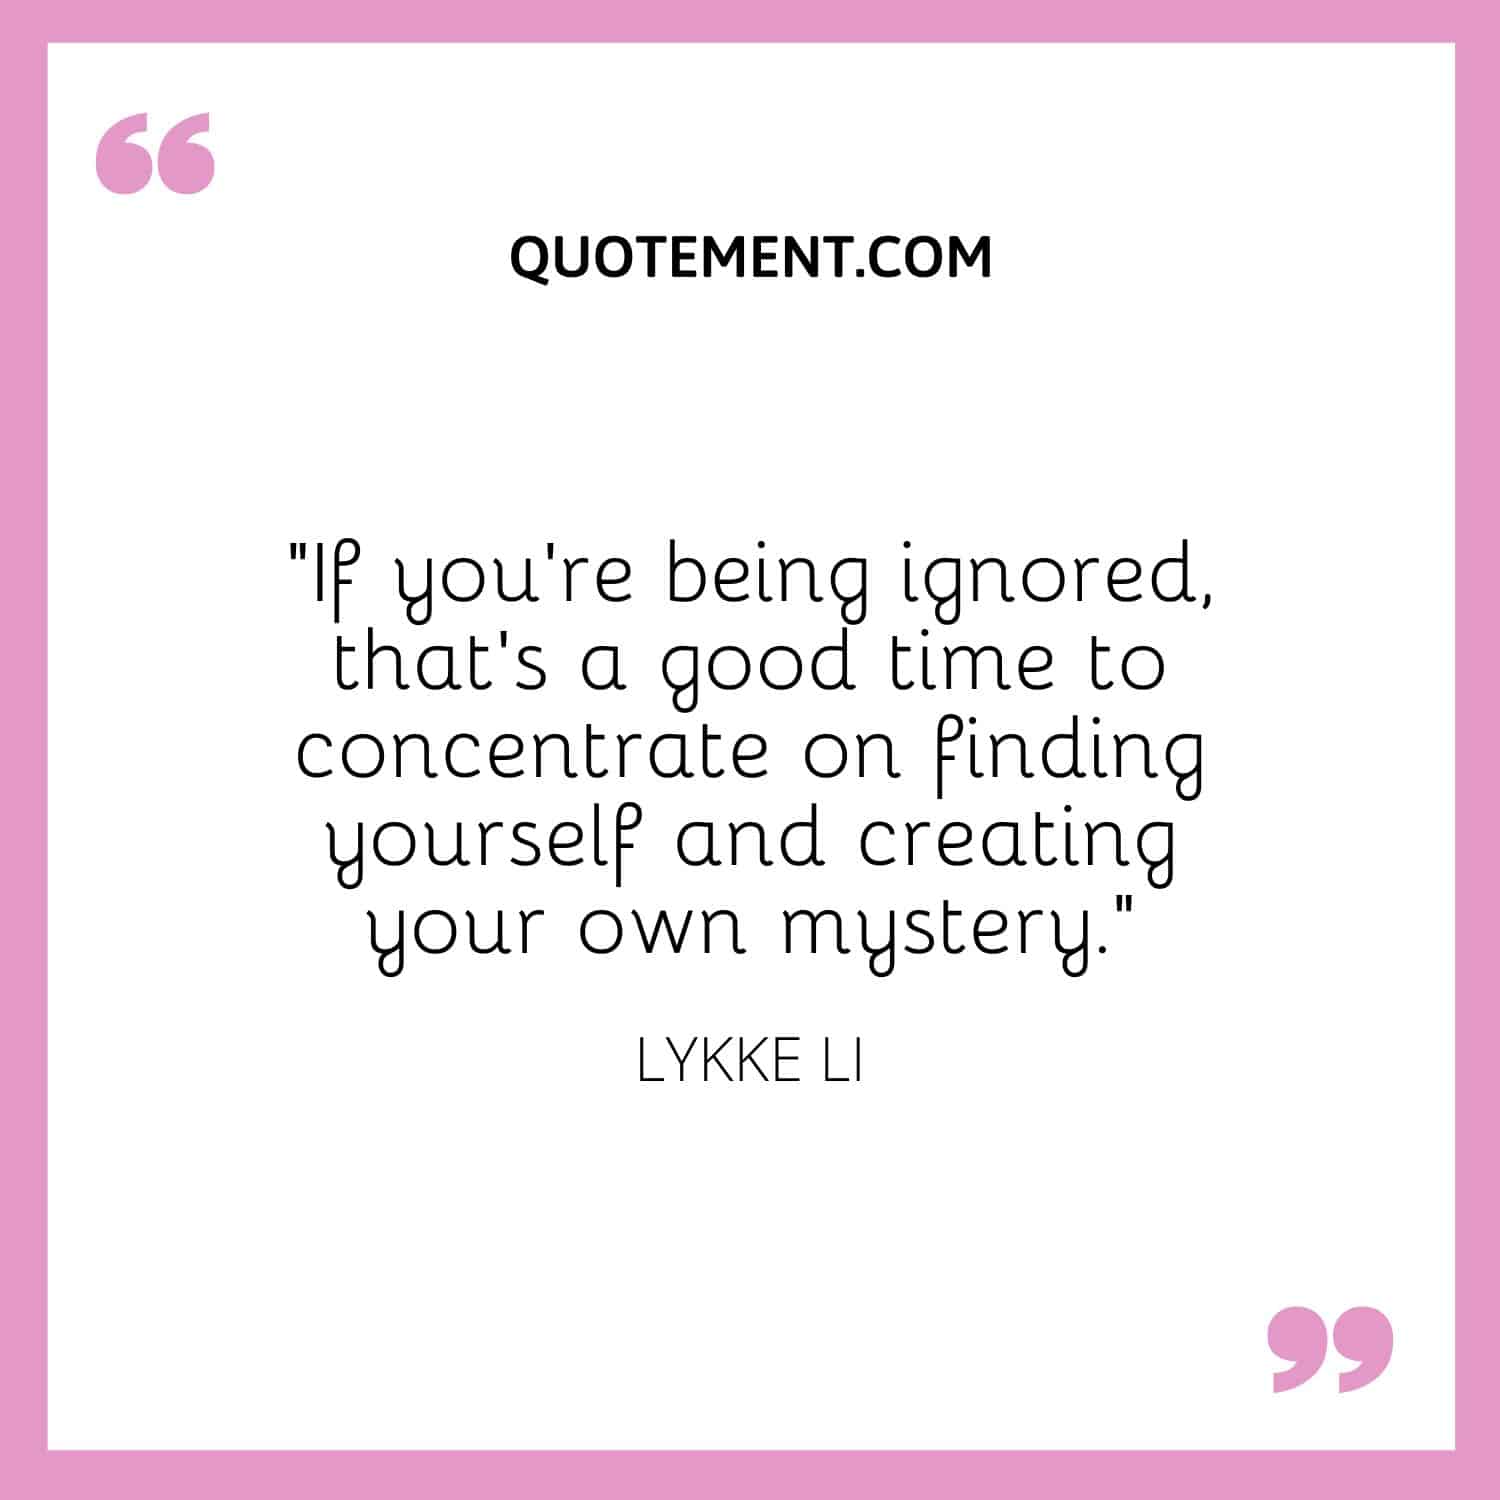 If you’re being ignored, that’s a good time to concentrate on finding yourself and creating your own mystery